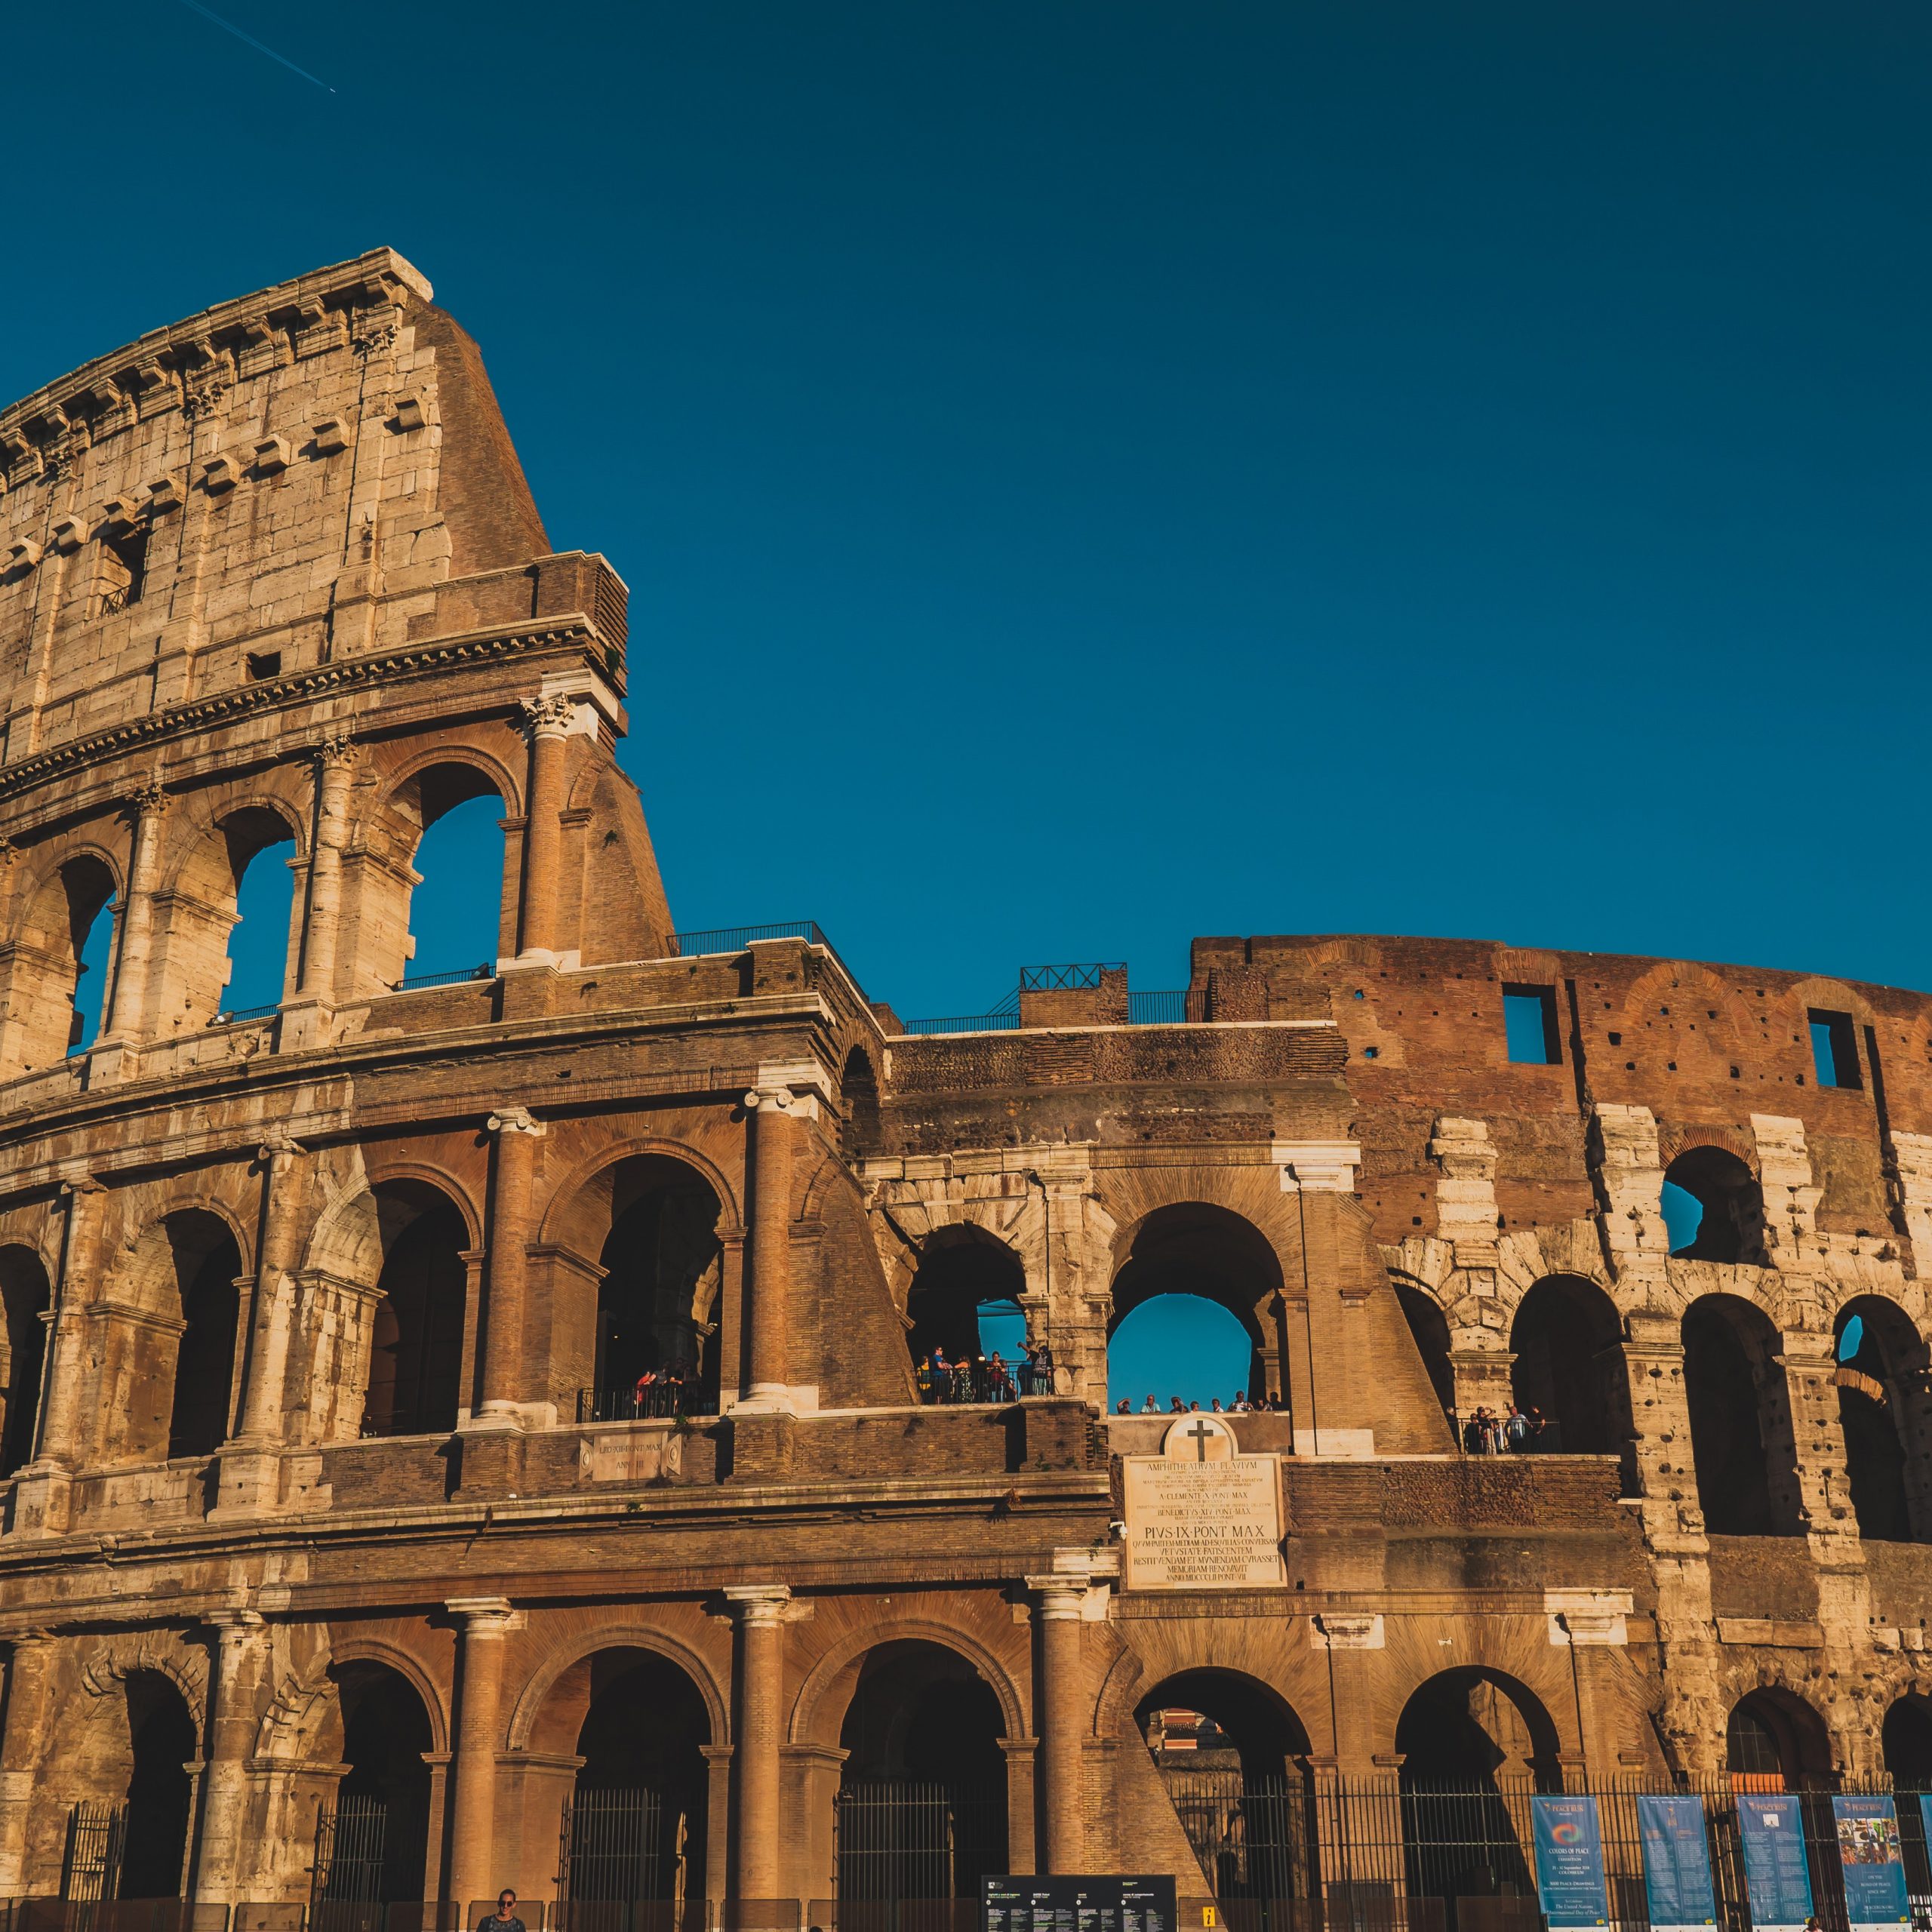 colosseum tours and tickets, rome vatican city, Museums and sistine chapel